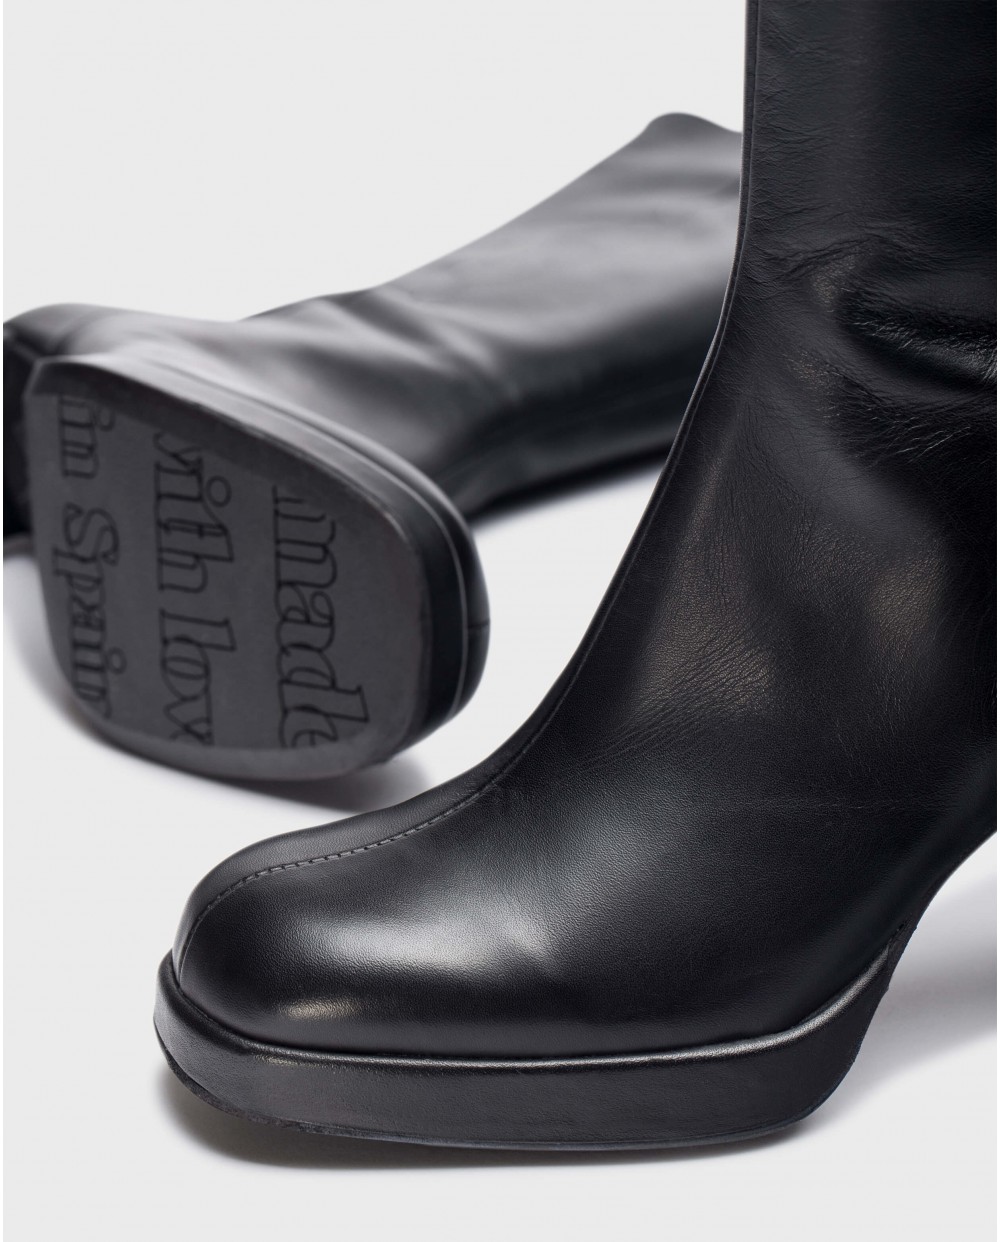 Wonders-Boots-Black SIA ankle boot